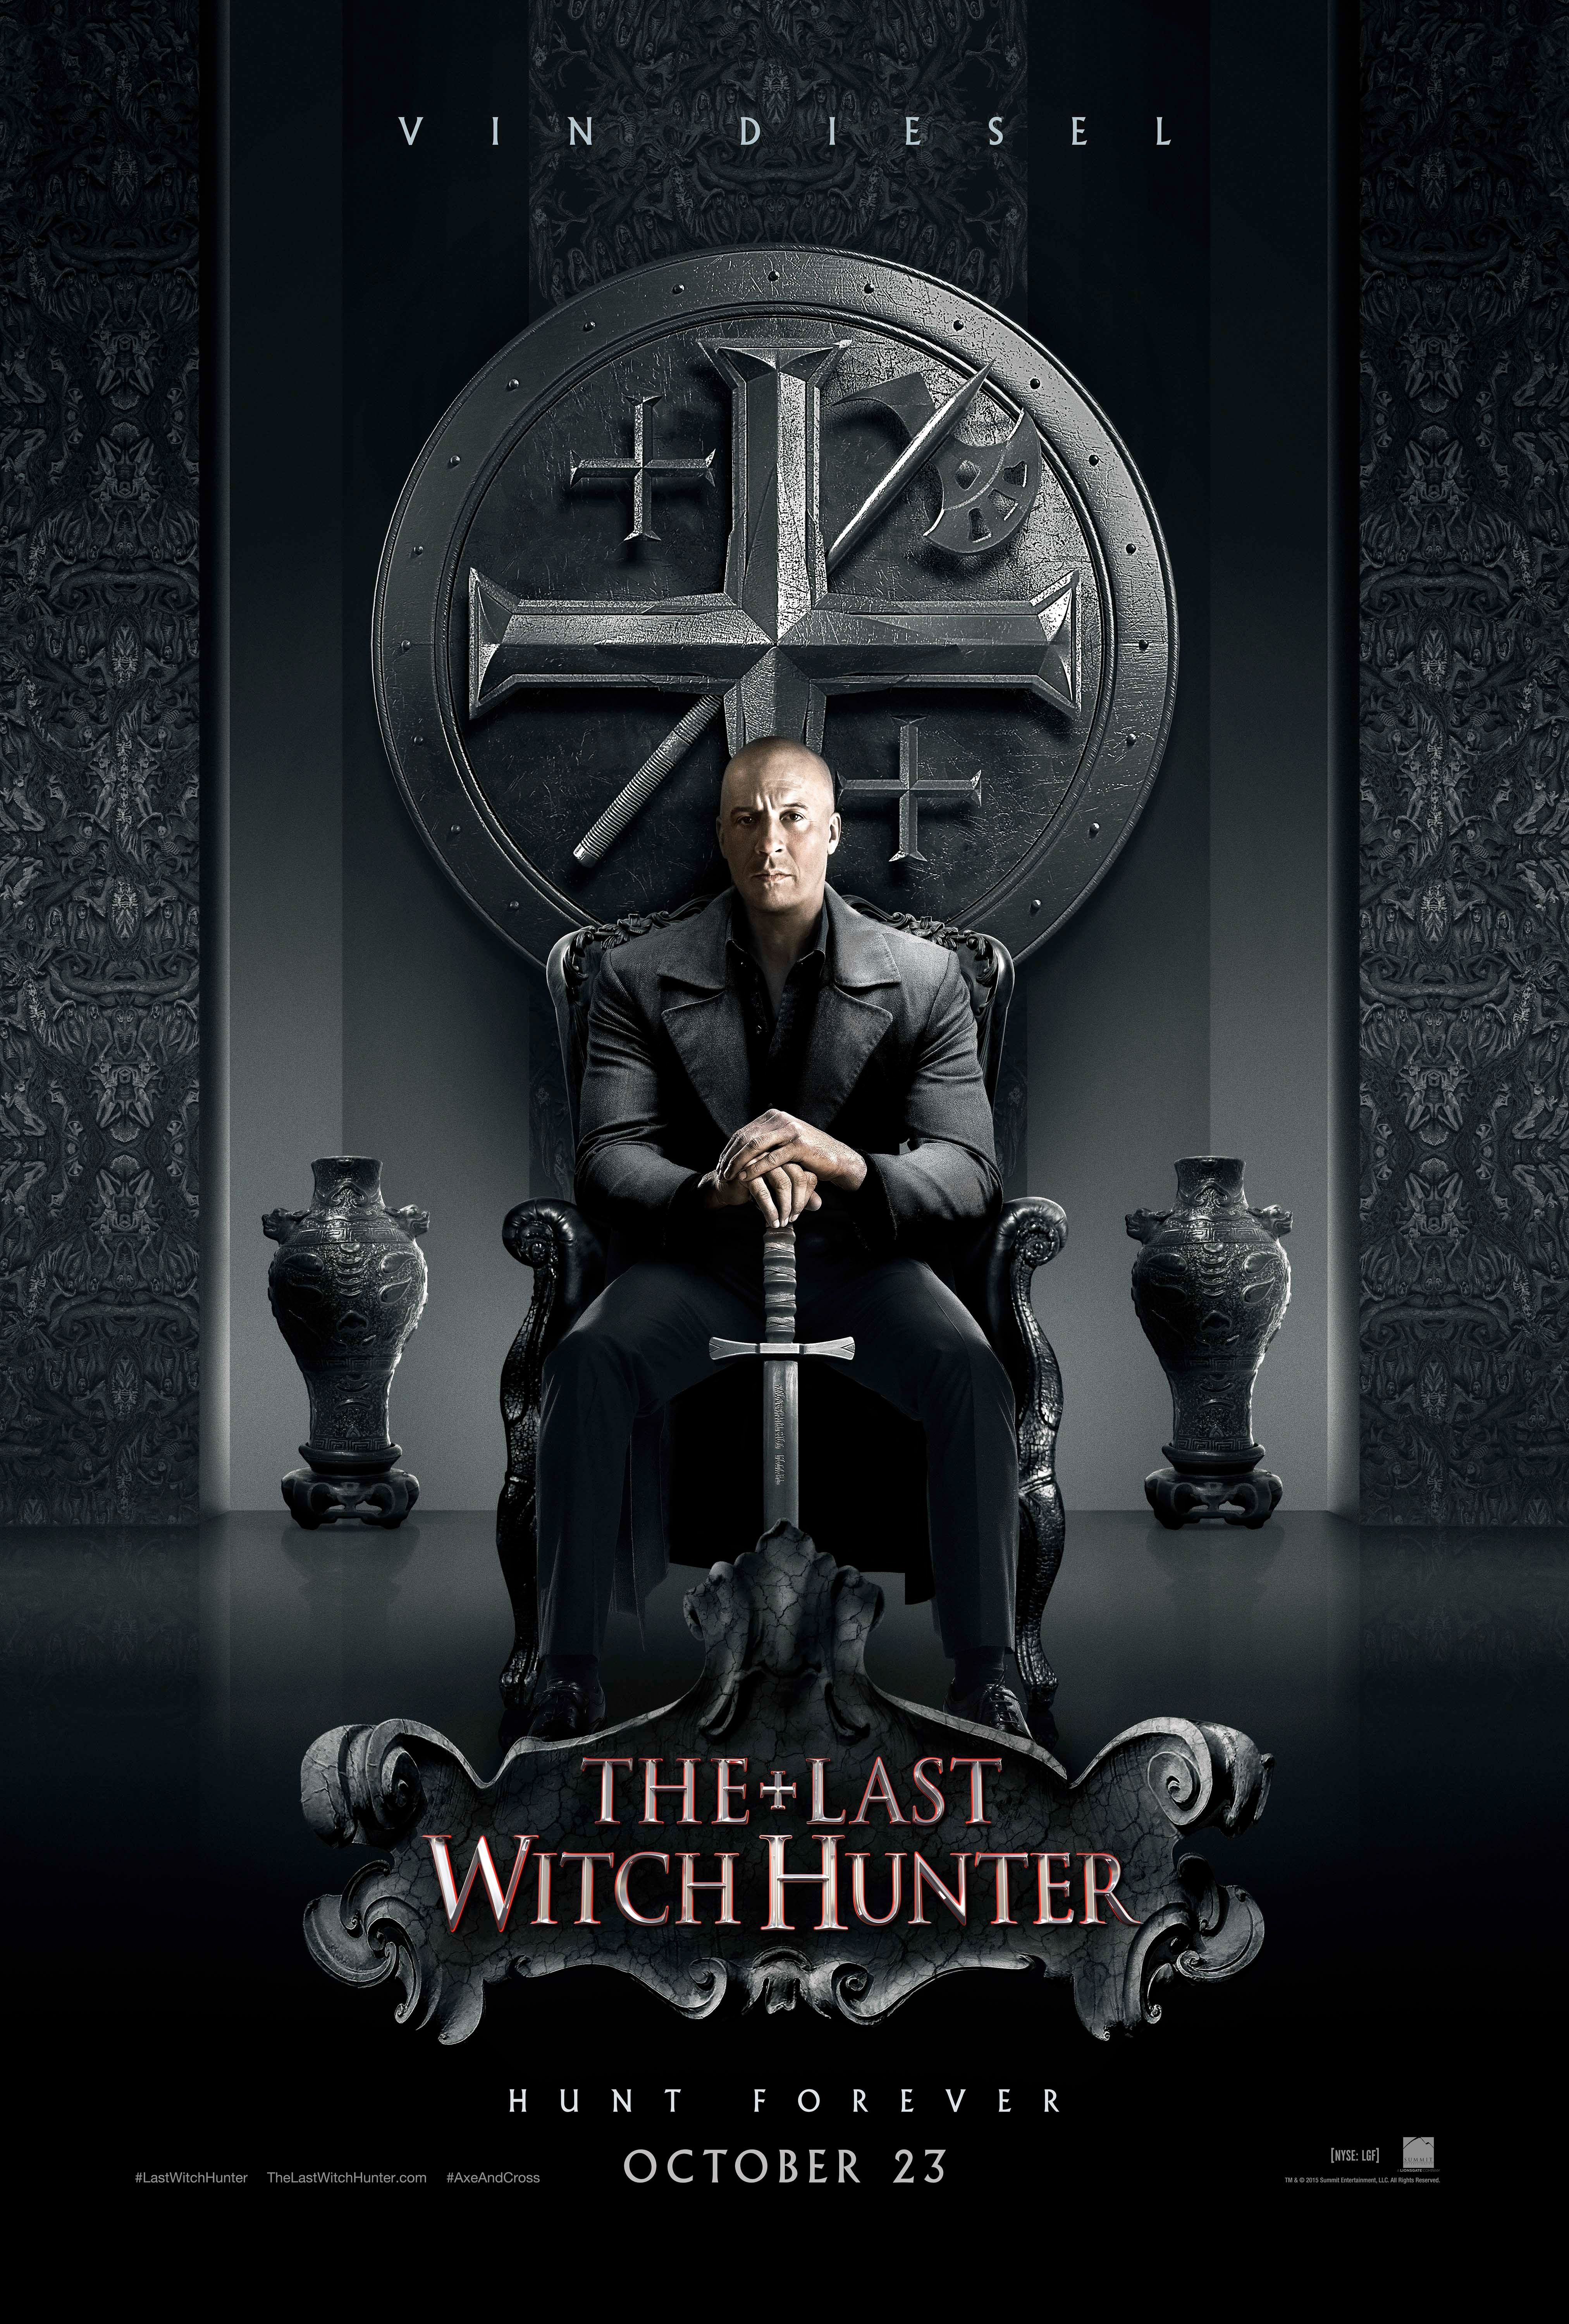 The Last Witch Hunter Comic-Con Poster 2